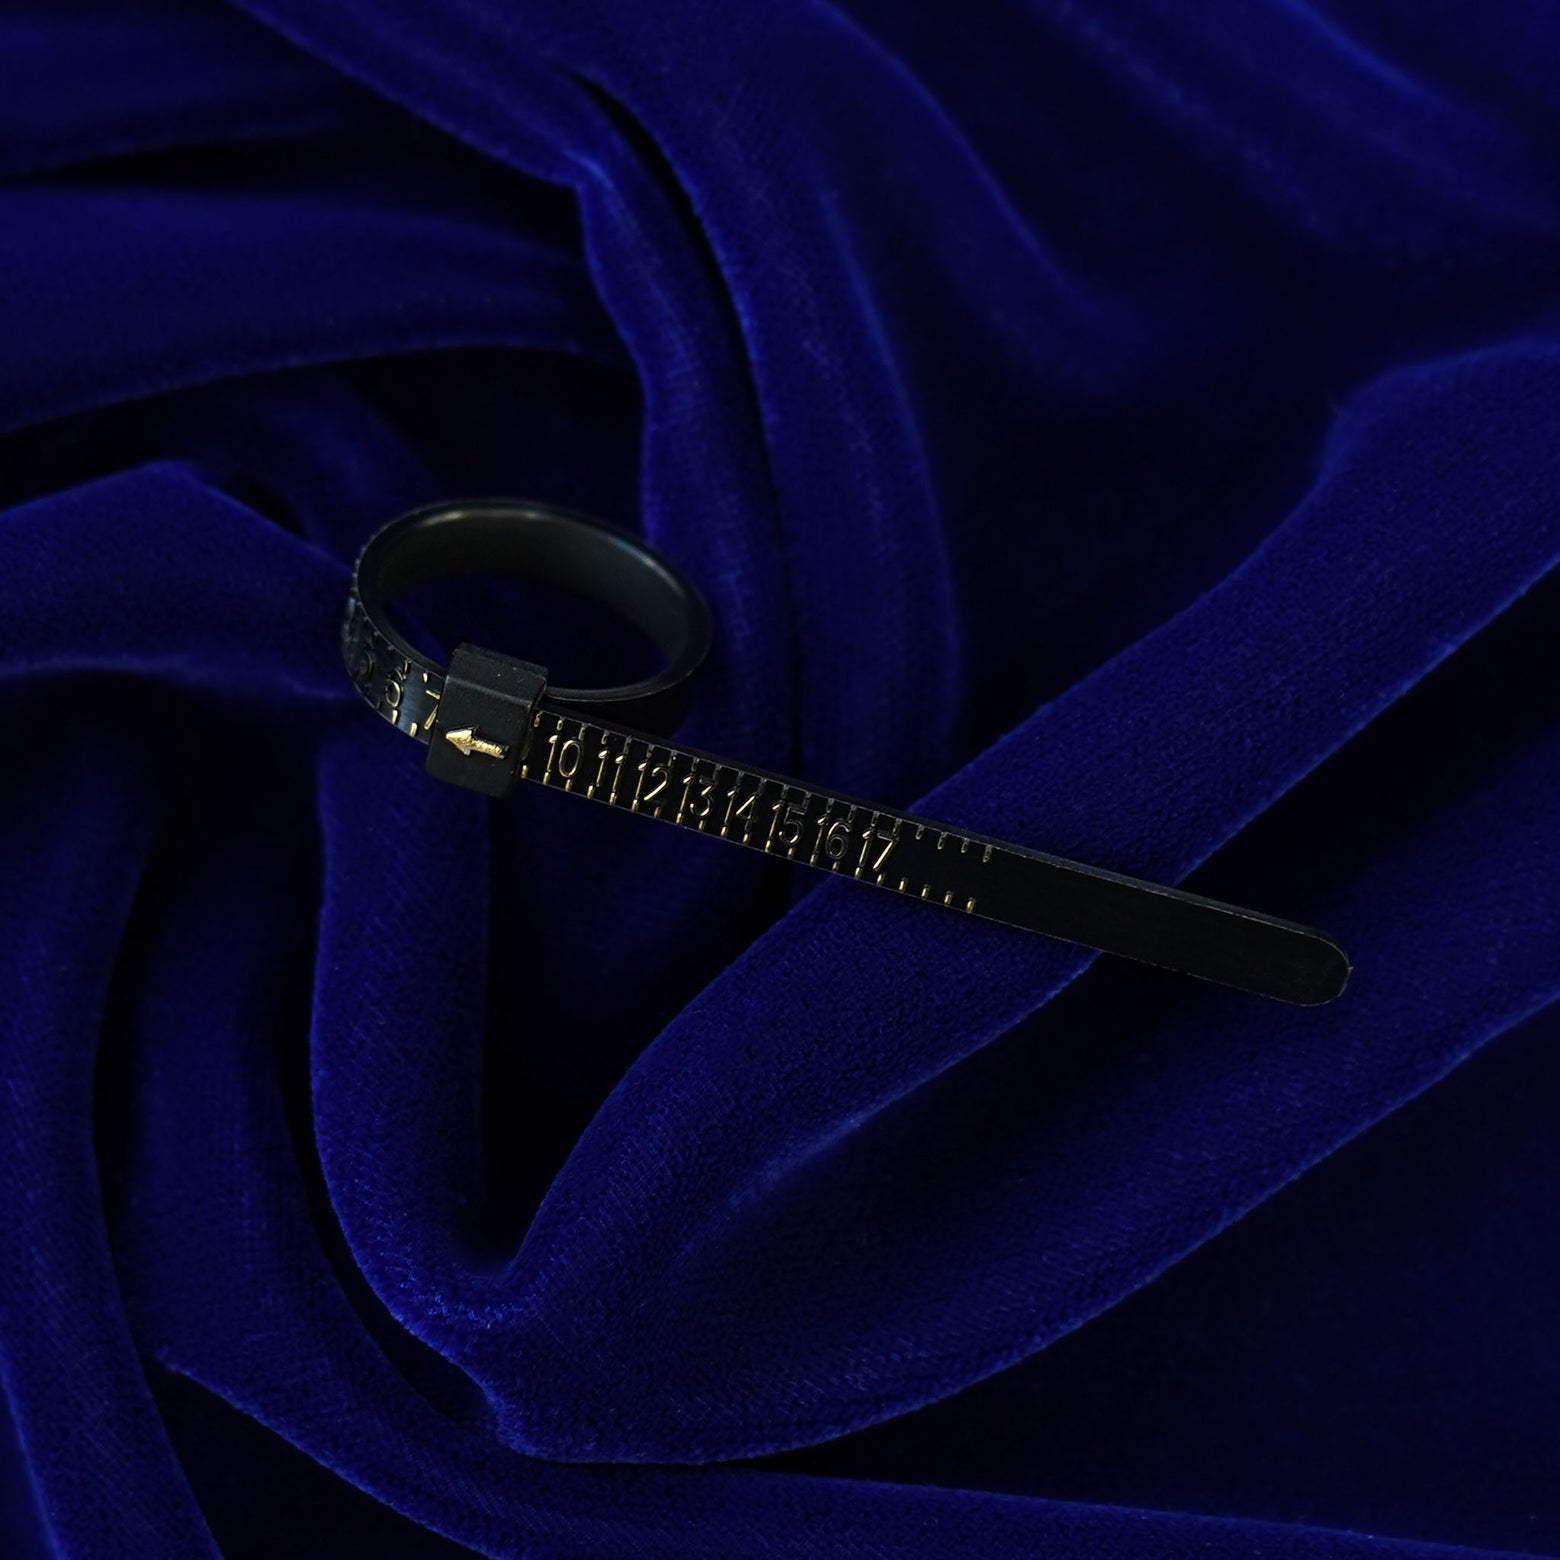 A black Ring Sizer with gold lettering indicating ring size 7 sitting on a dark blue background